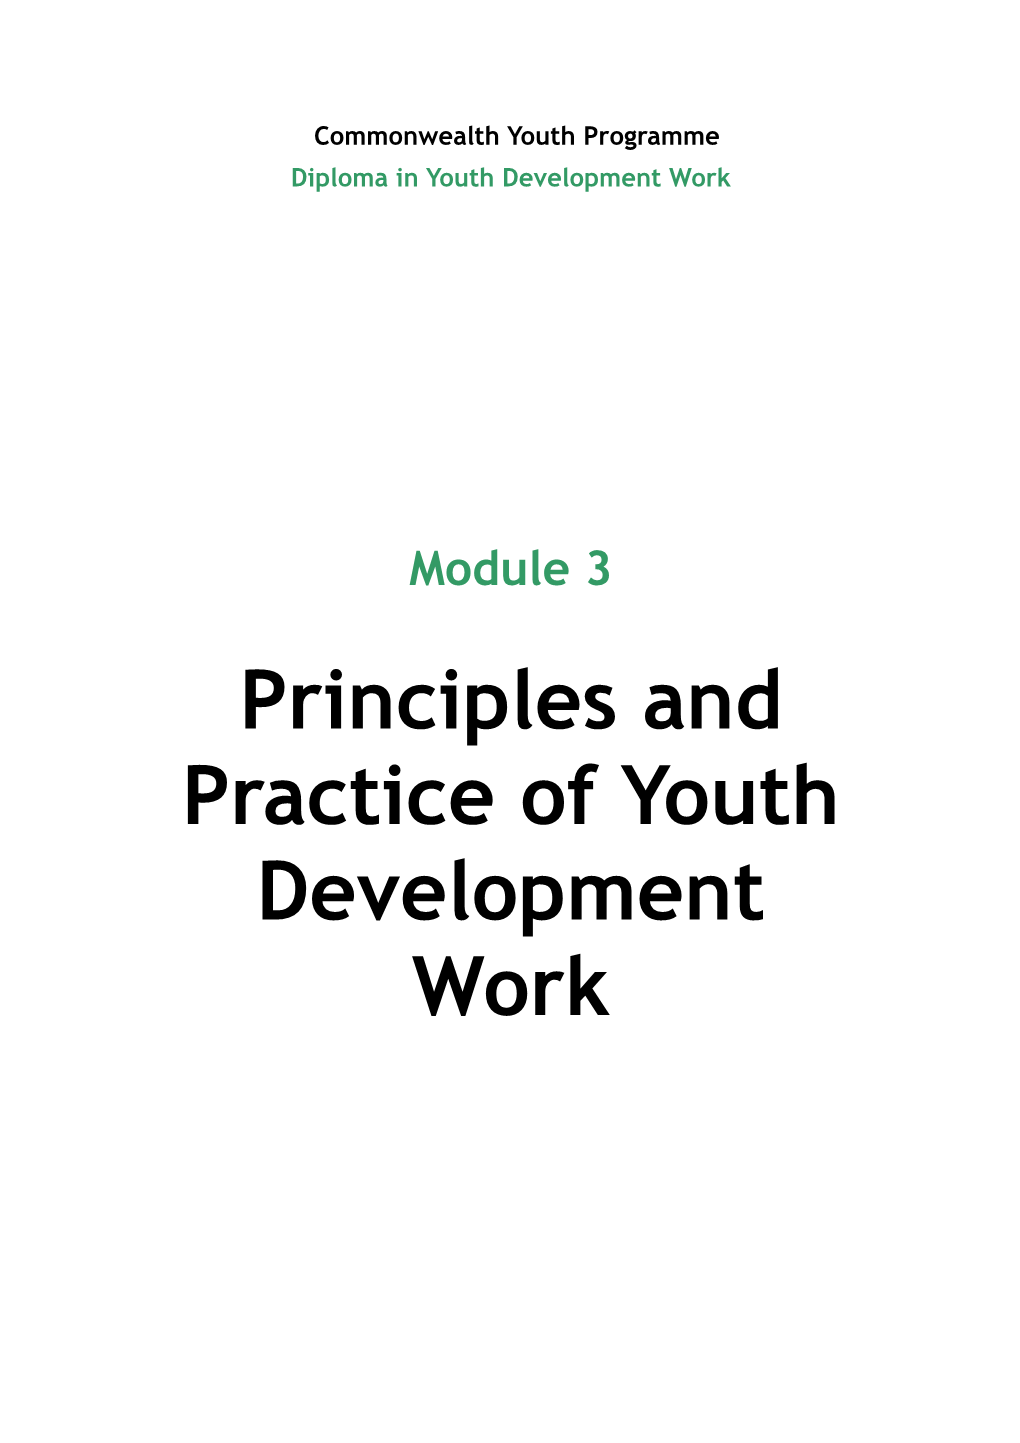 Module-3 Title: Principles and Practice of Youth Development Work